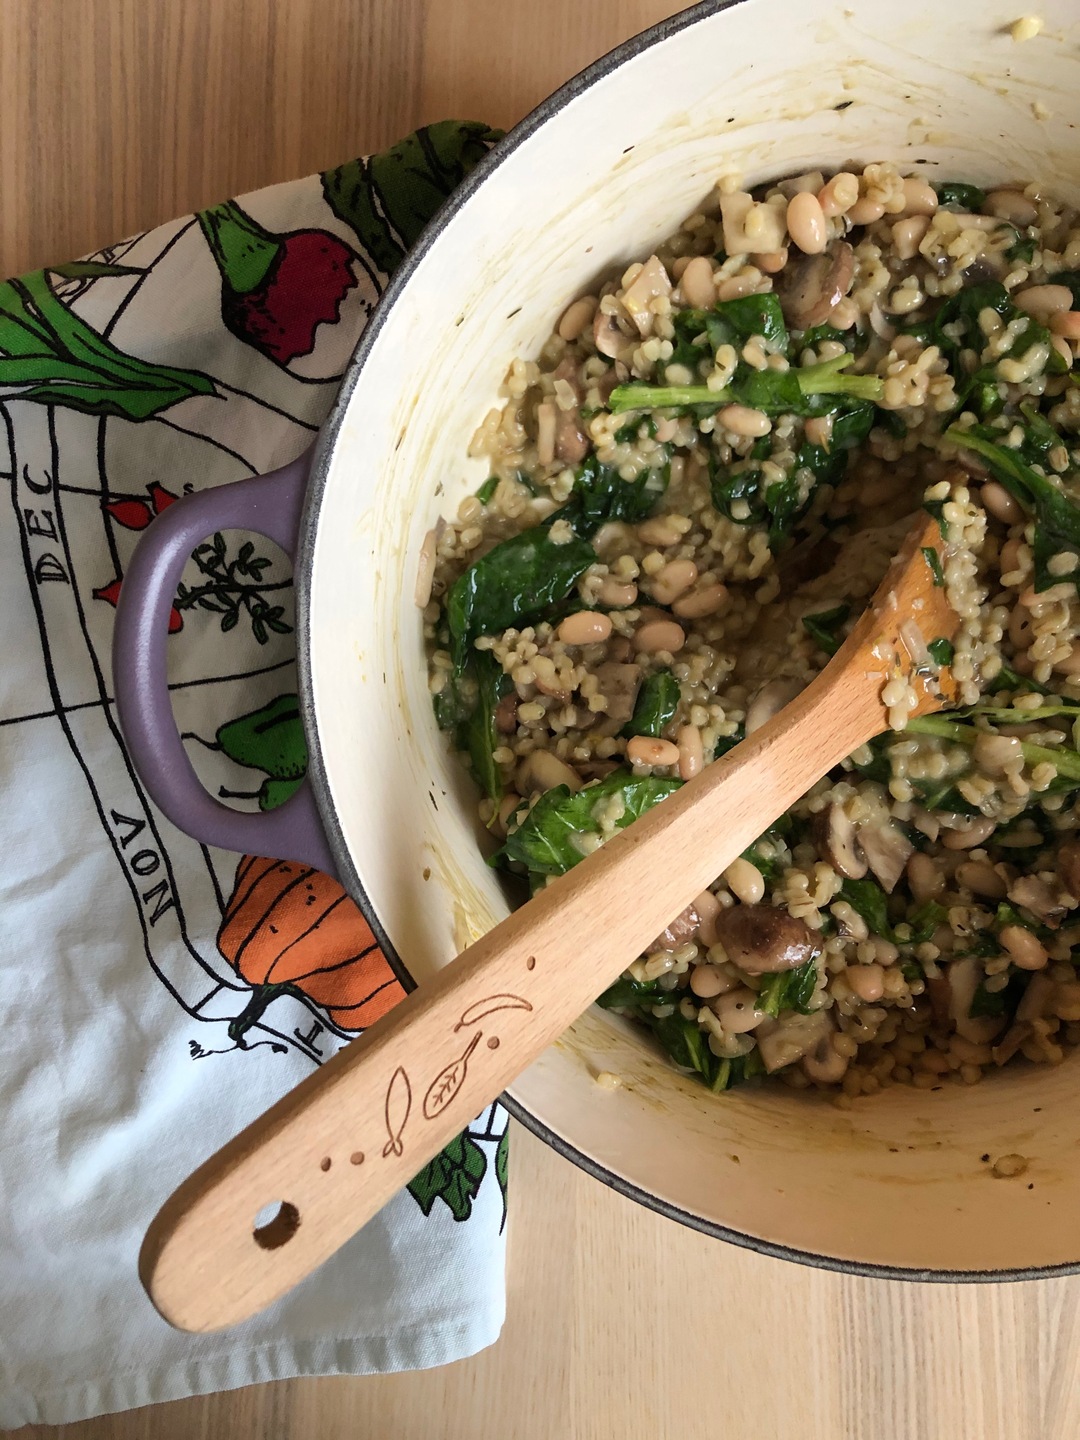 Barley risotto with mushrooms and spinach